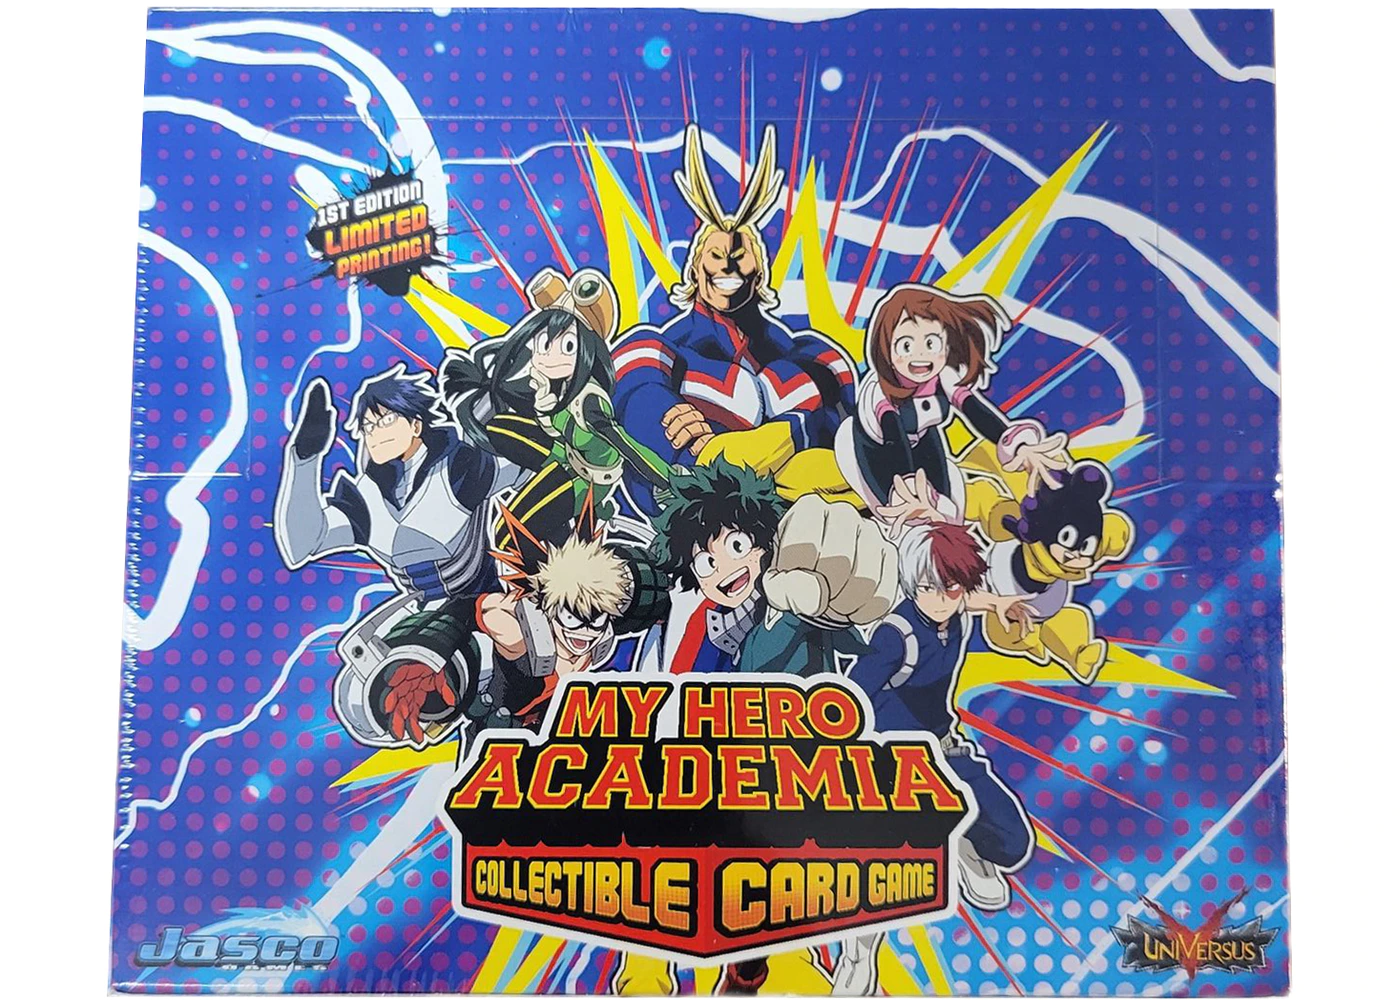 My Hero Academia Collectible Card Game Booster Box (1st Edition)